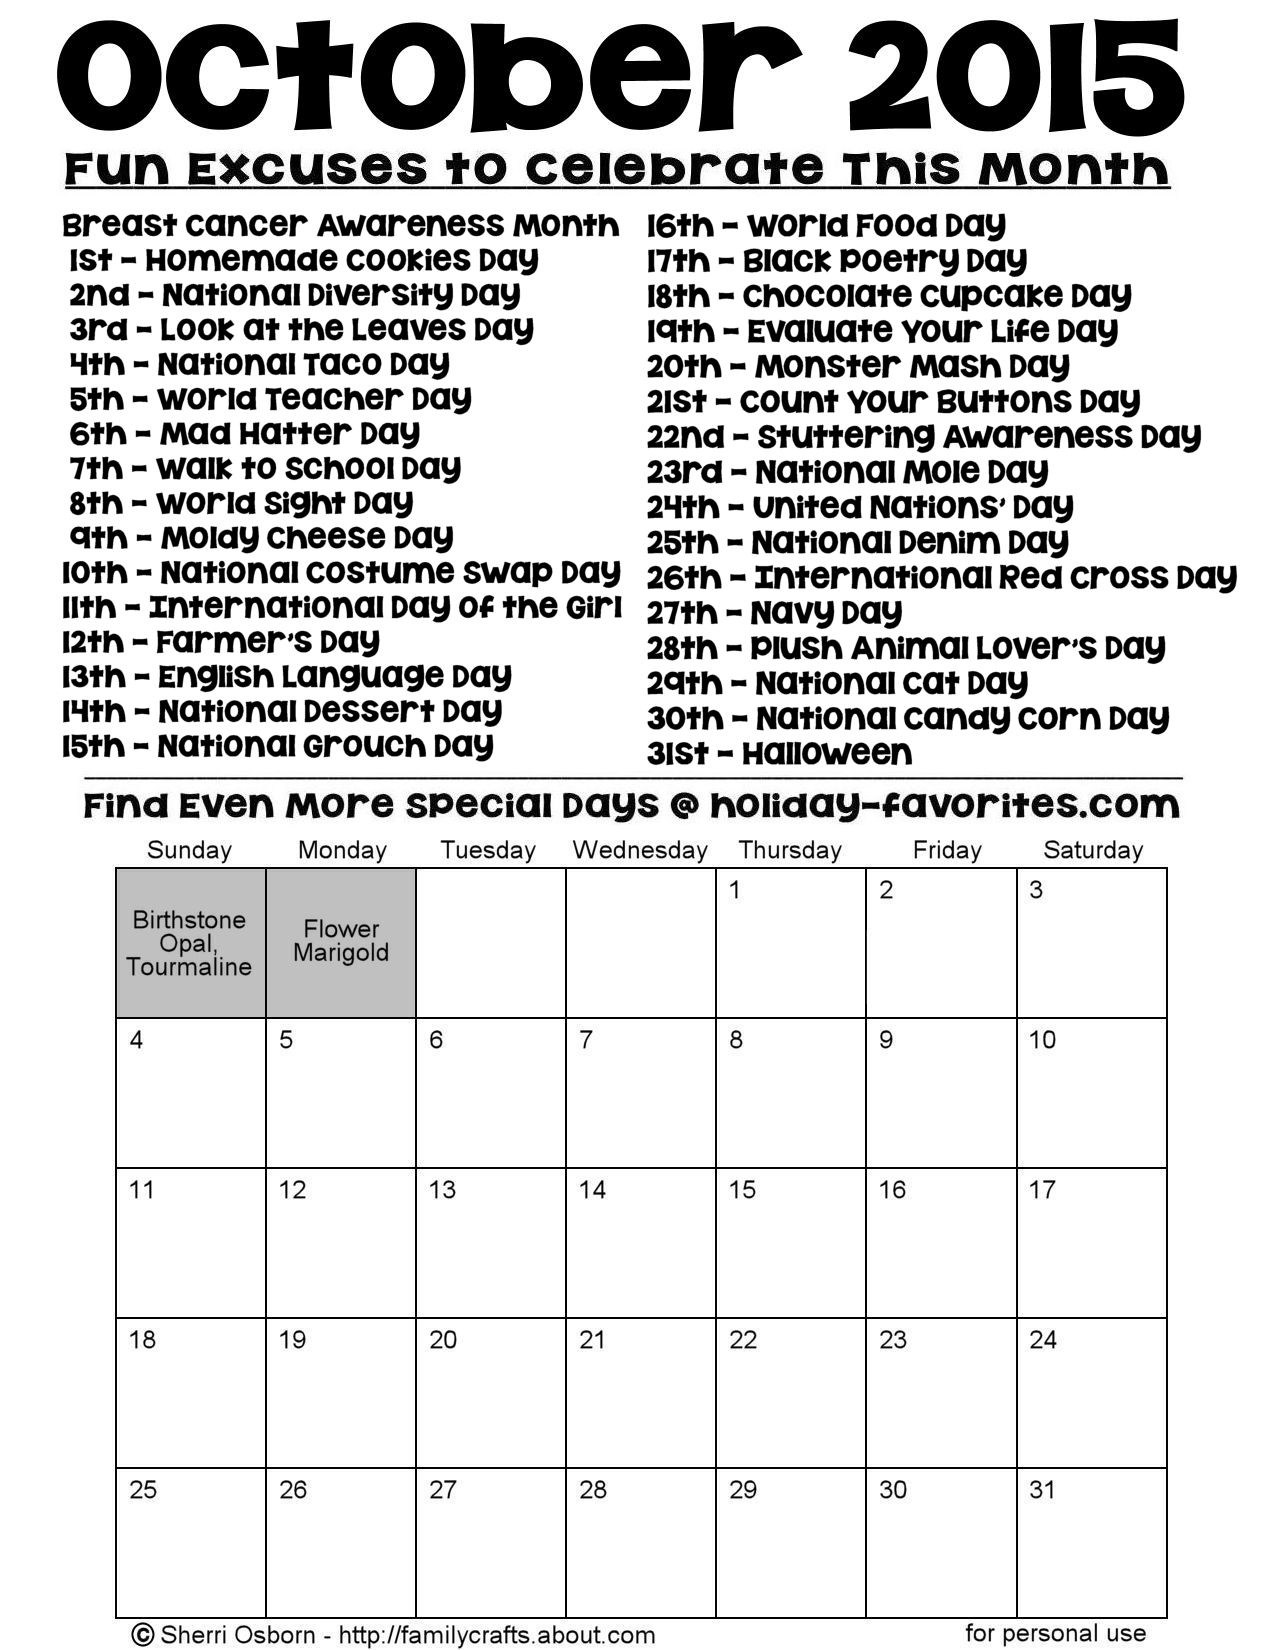 Printable October 2015 Special Days Calendar | Holiday Favorites intended for Calendar With All The Special Days